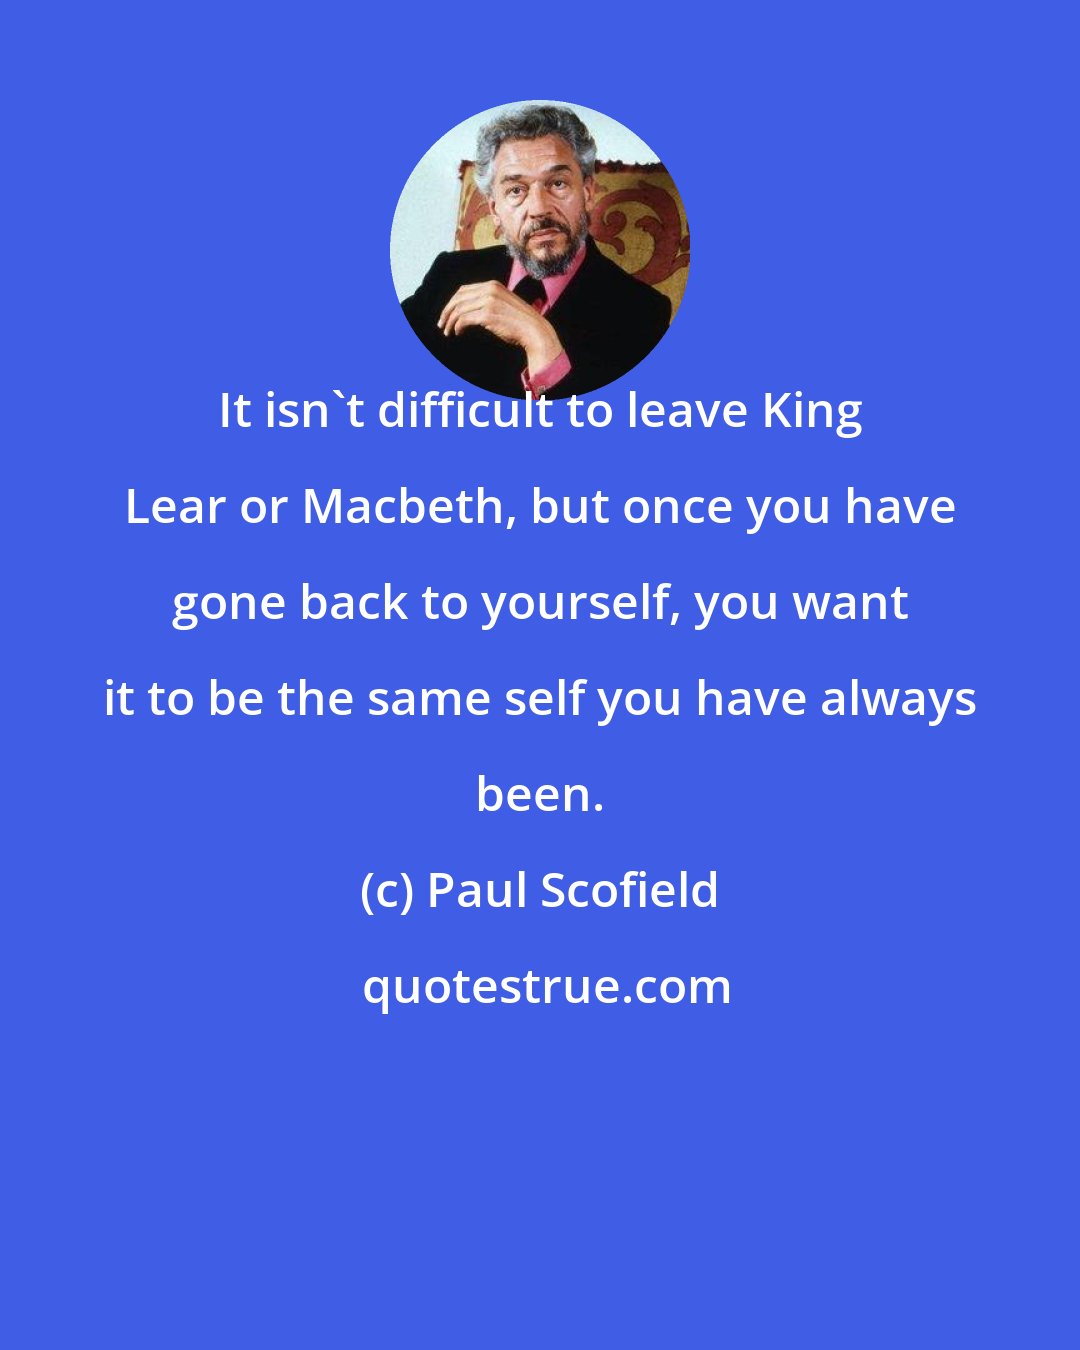 Paul Scofield: It isn't difficult to leave King Lear or Macbeth, but once you have gone back to yourself, you want it to be the same self you have always been.